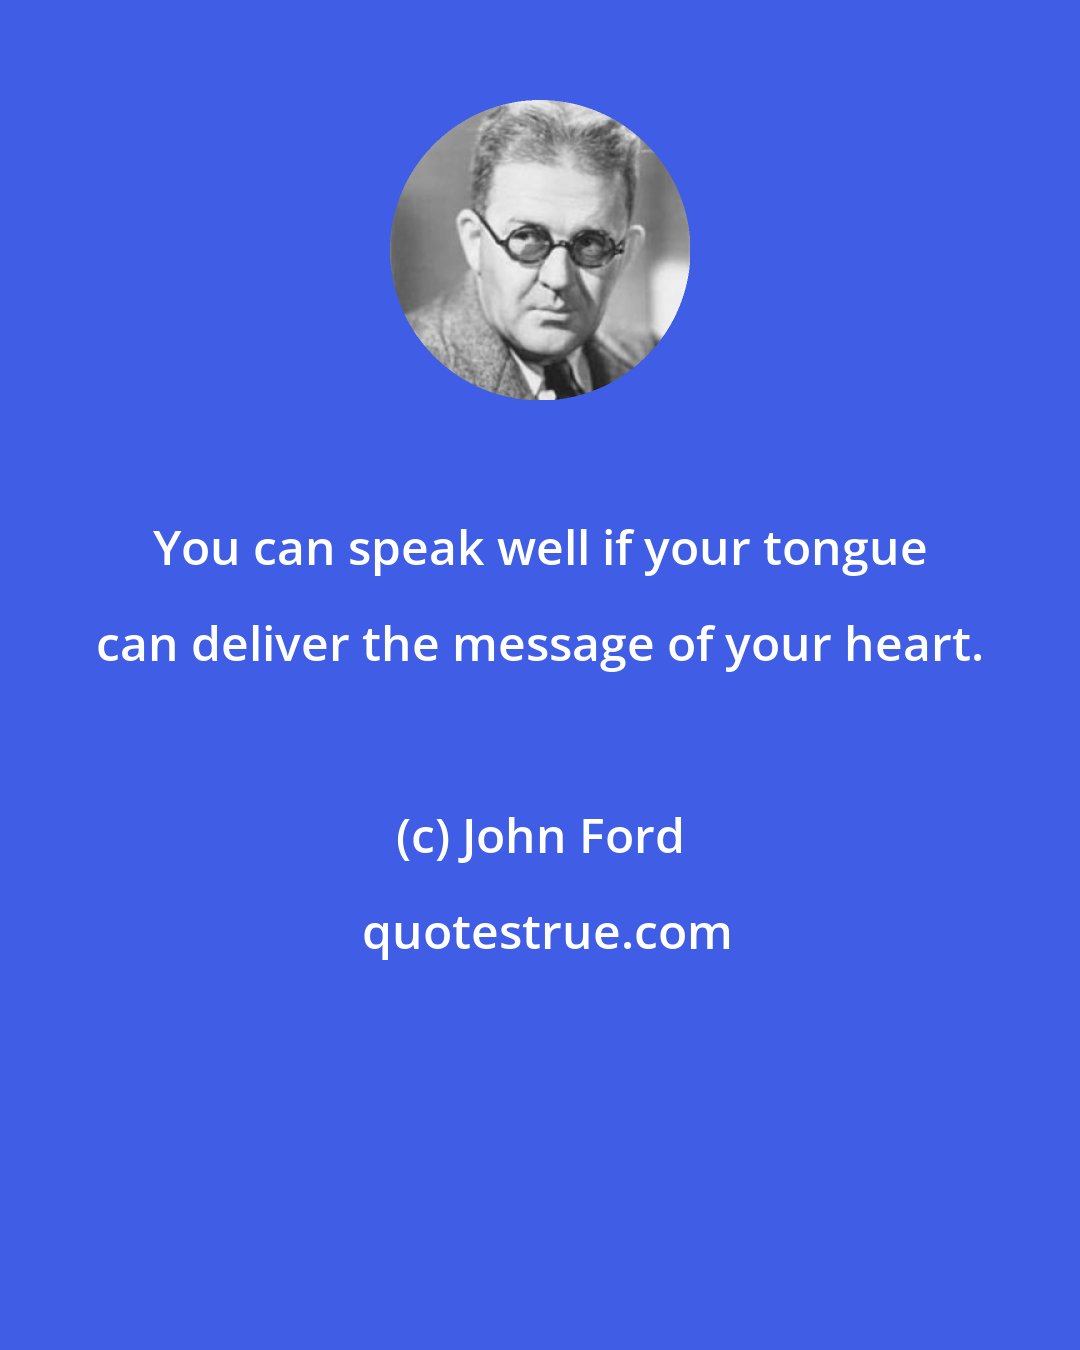 John Ford: You can speak well if your tongue can deliver the message of your heart.